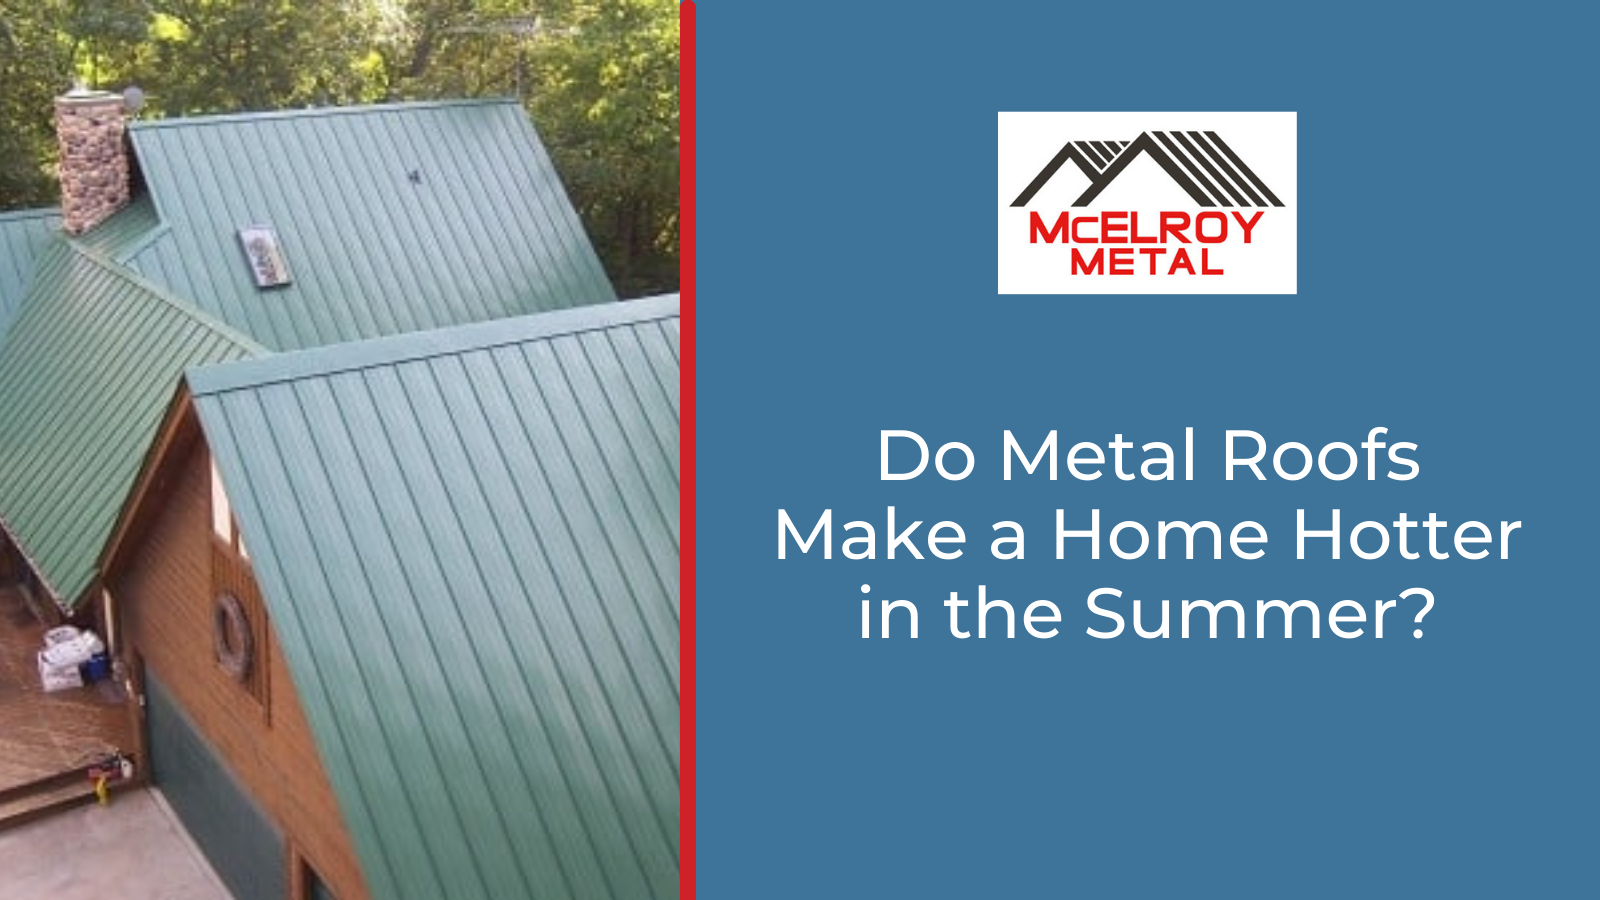 Do Metal Roofs Make a Home Hotter in the Summer?